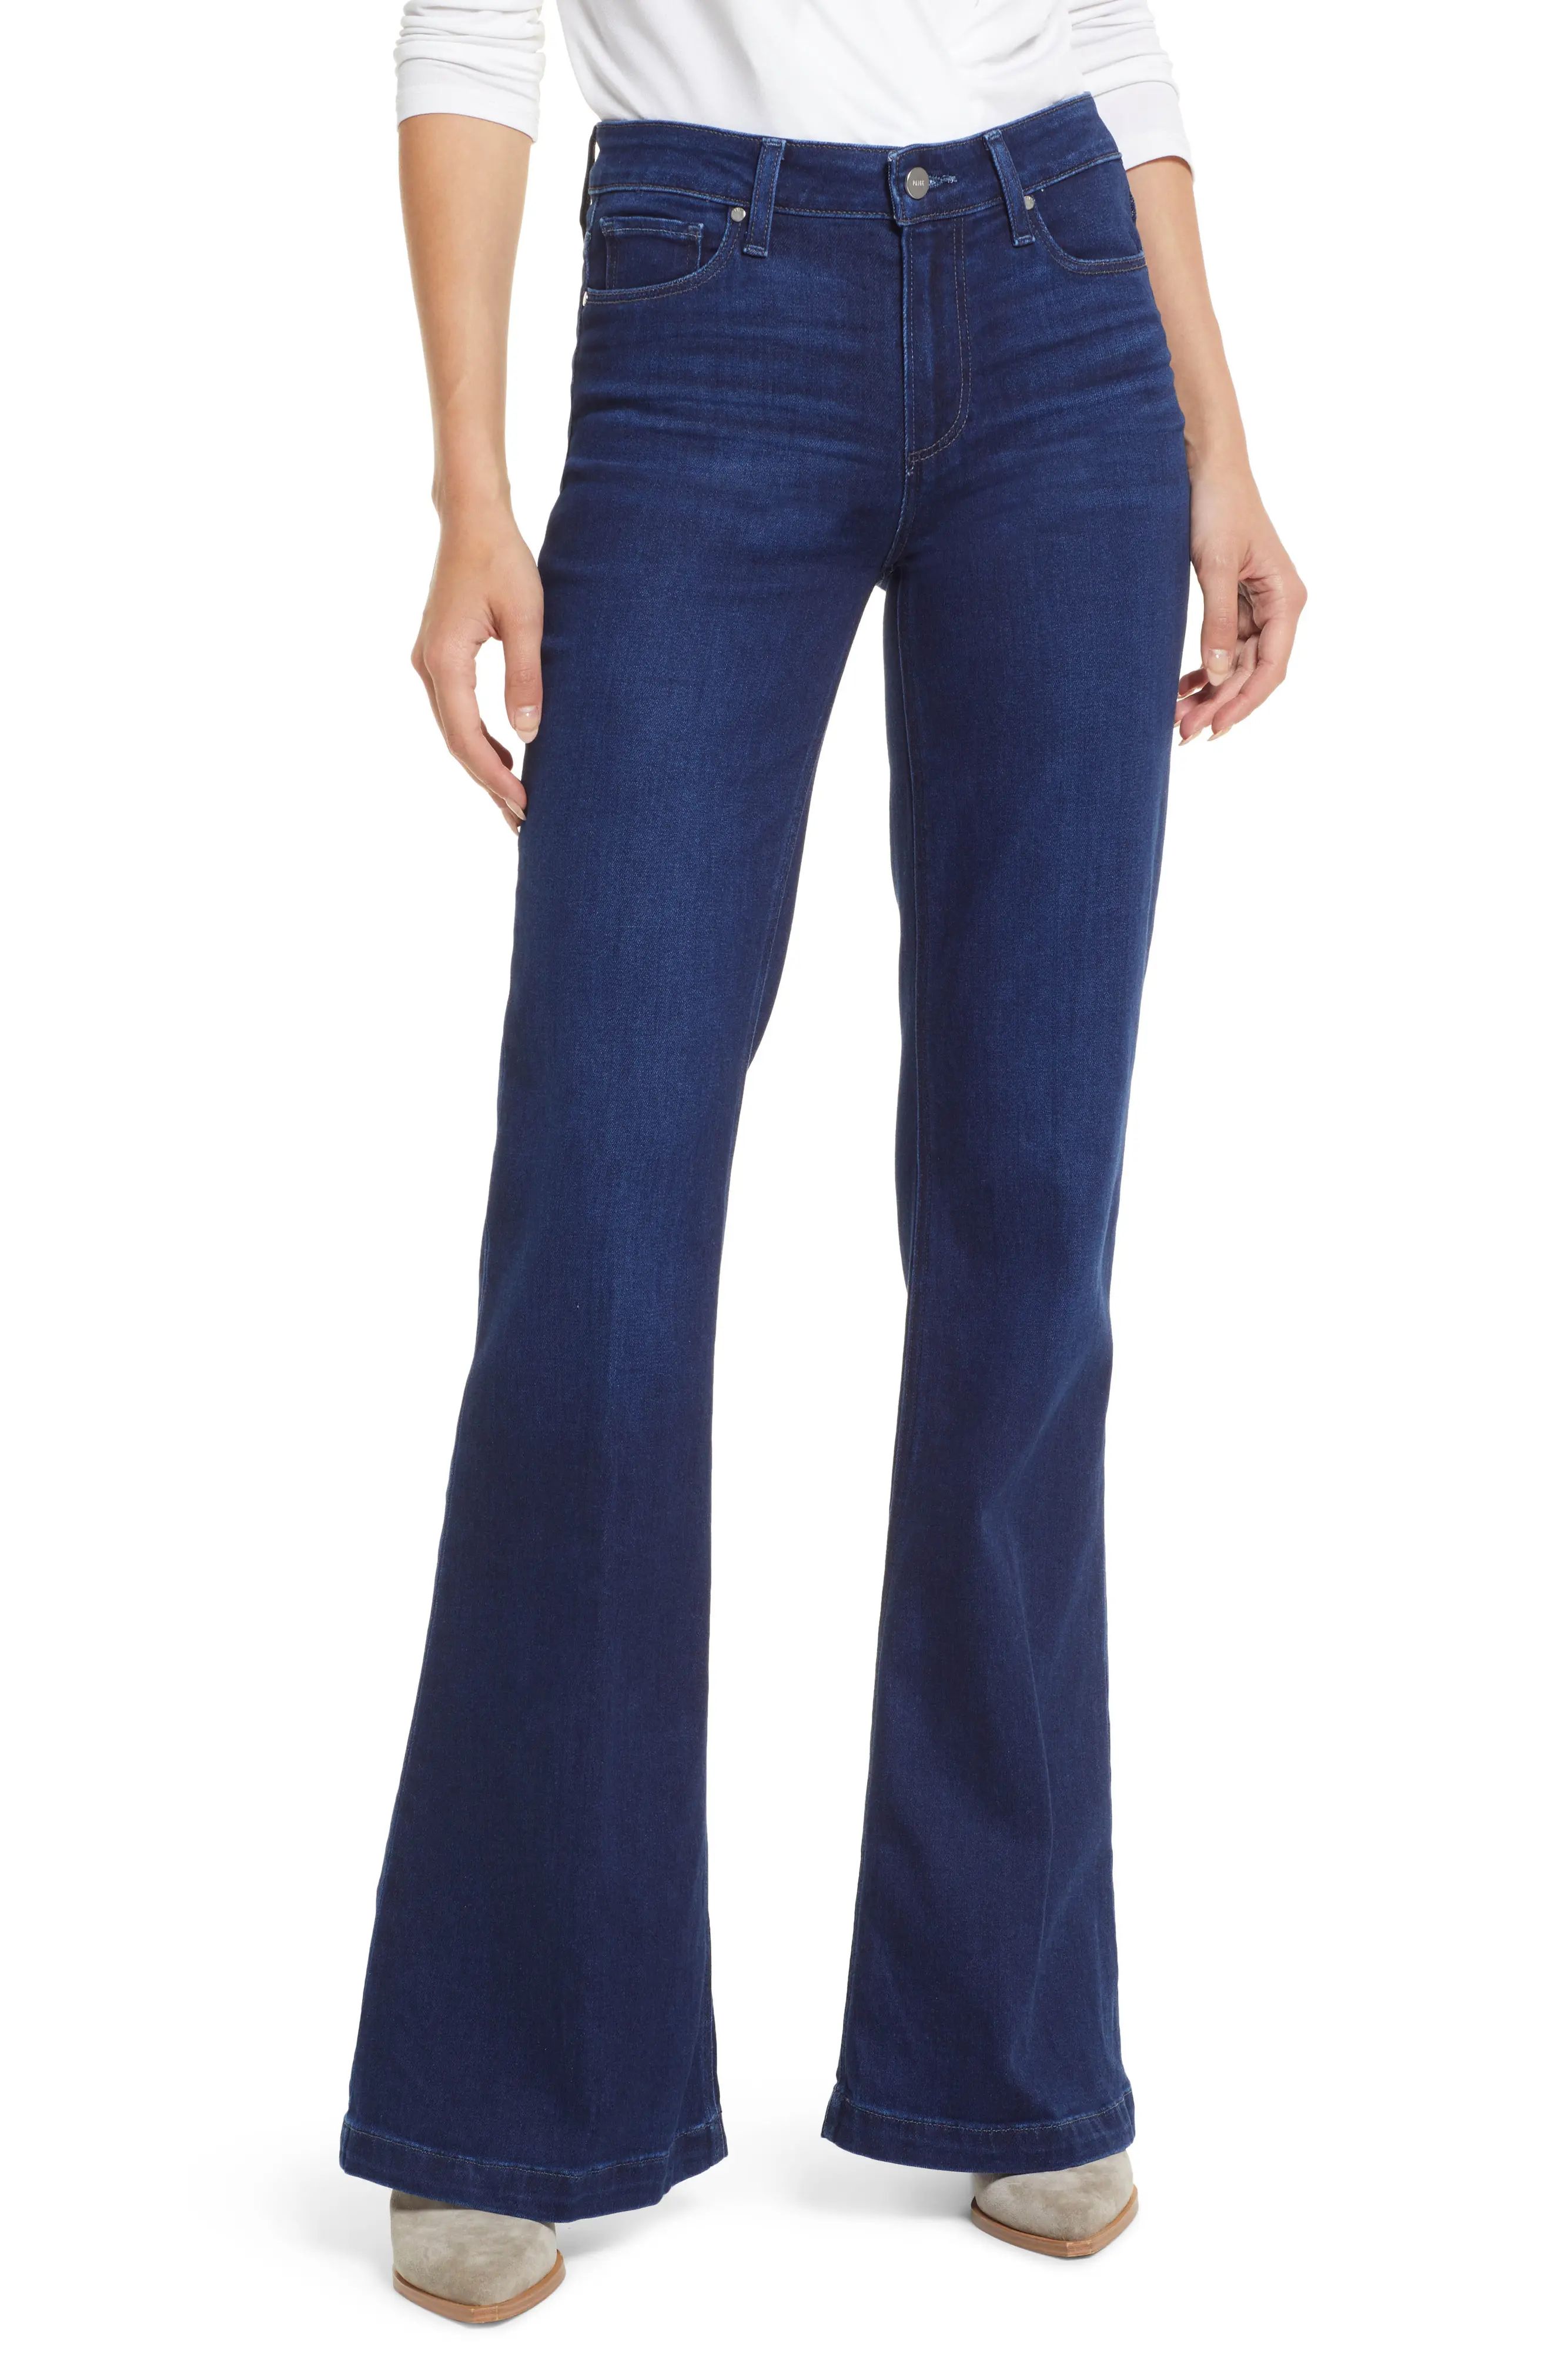 PAIGE Genevieve High Waist Flare Jeans, Size 26 in Model at Nordstrom | Nordstrom